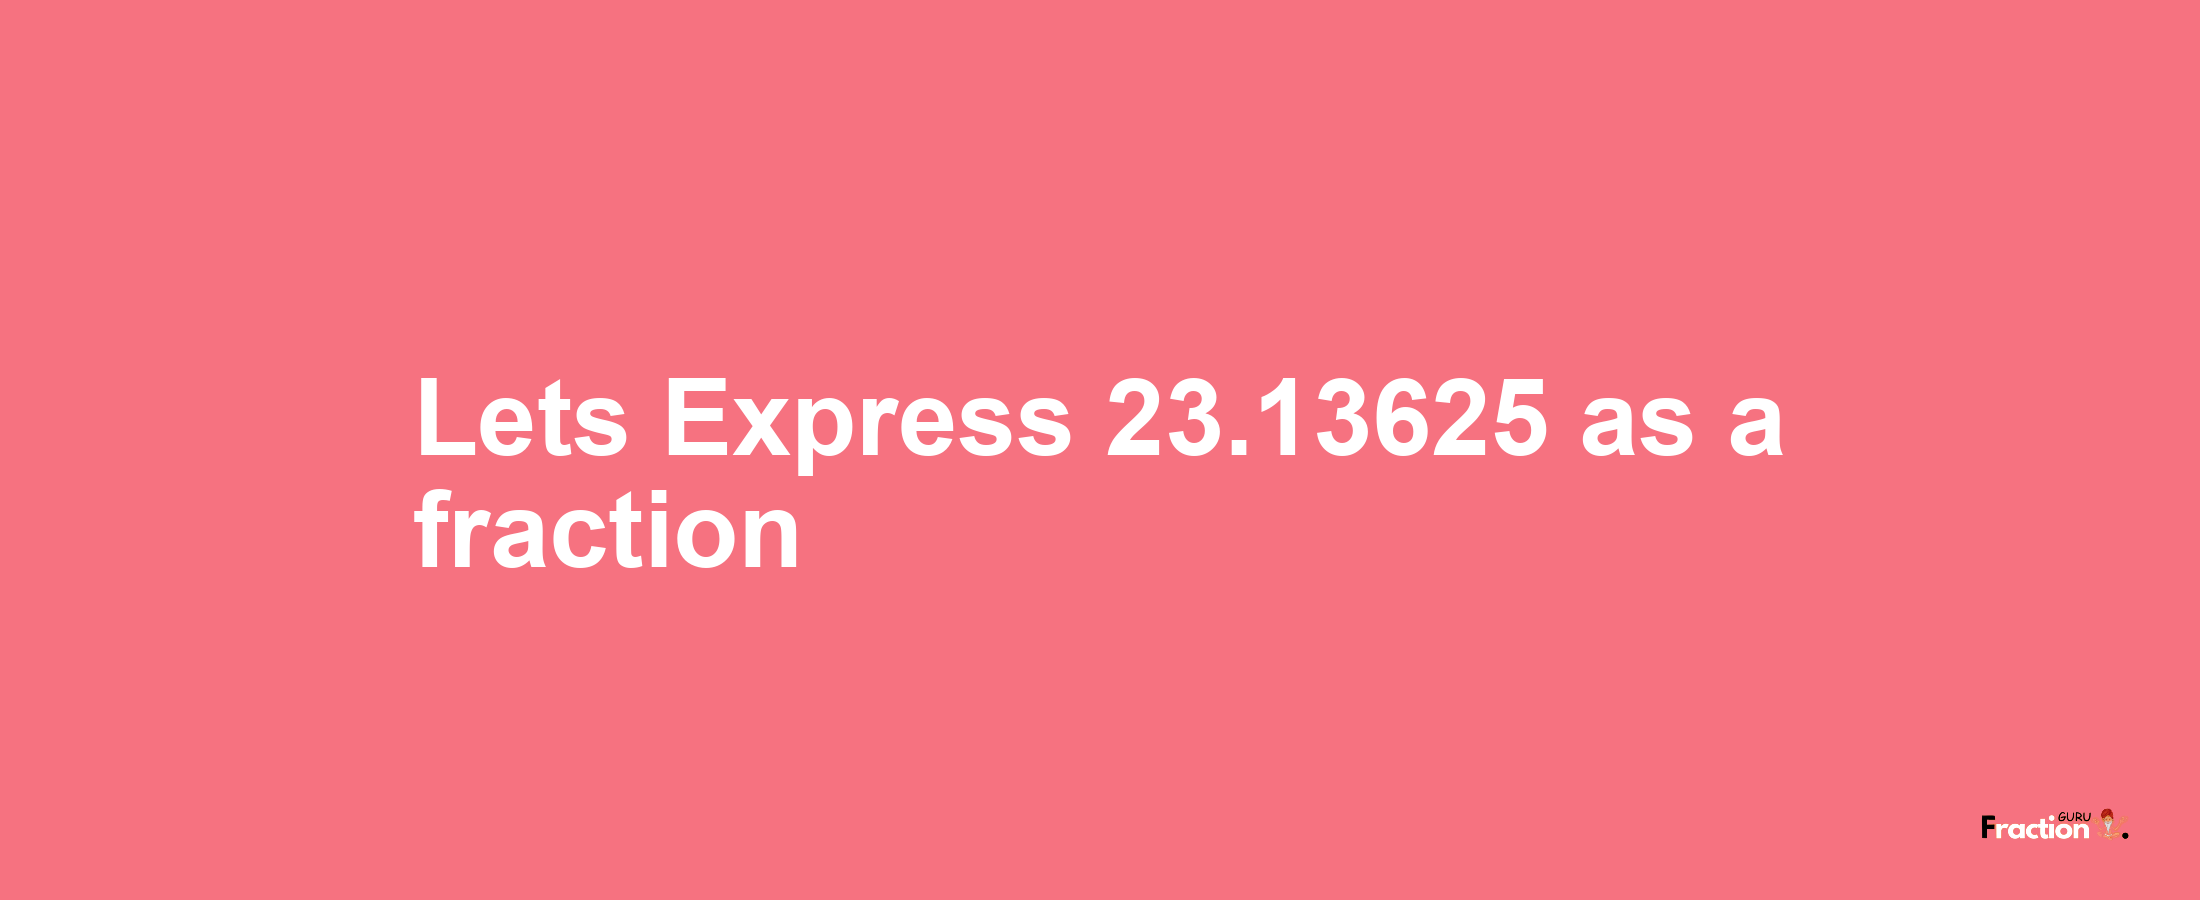 Lets Express 23.13625 as afraction